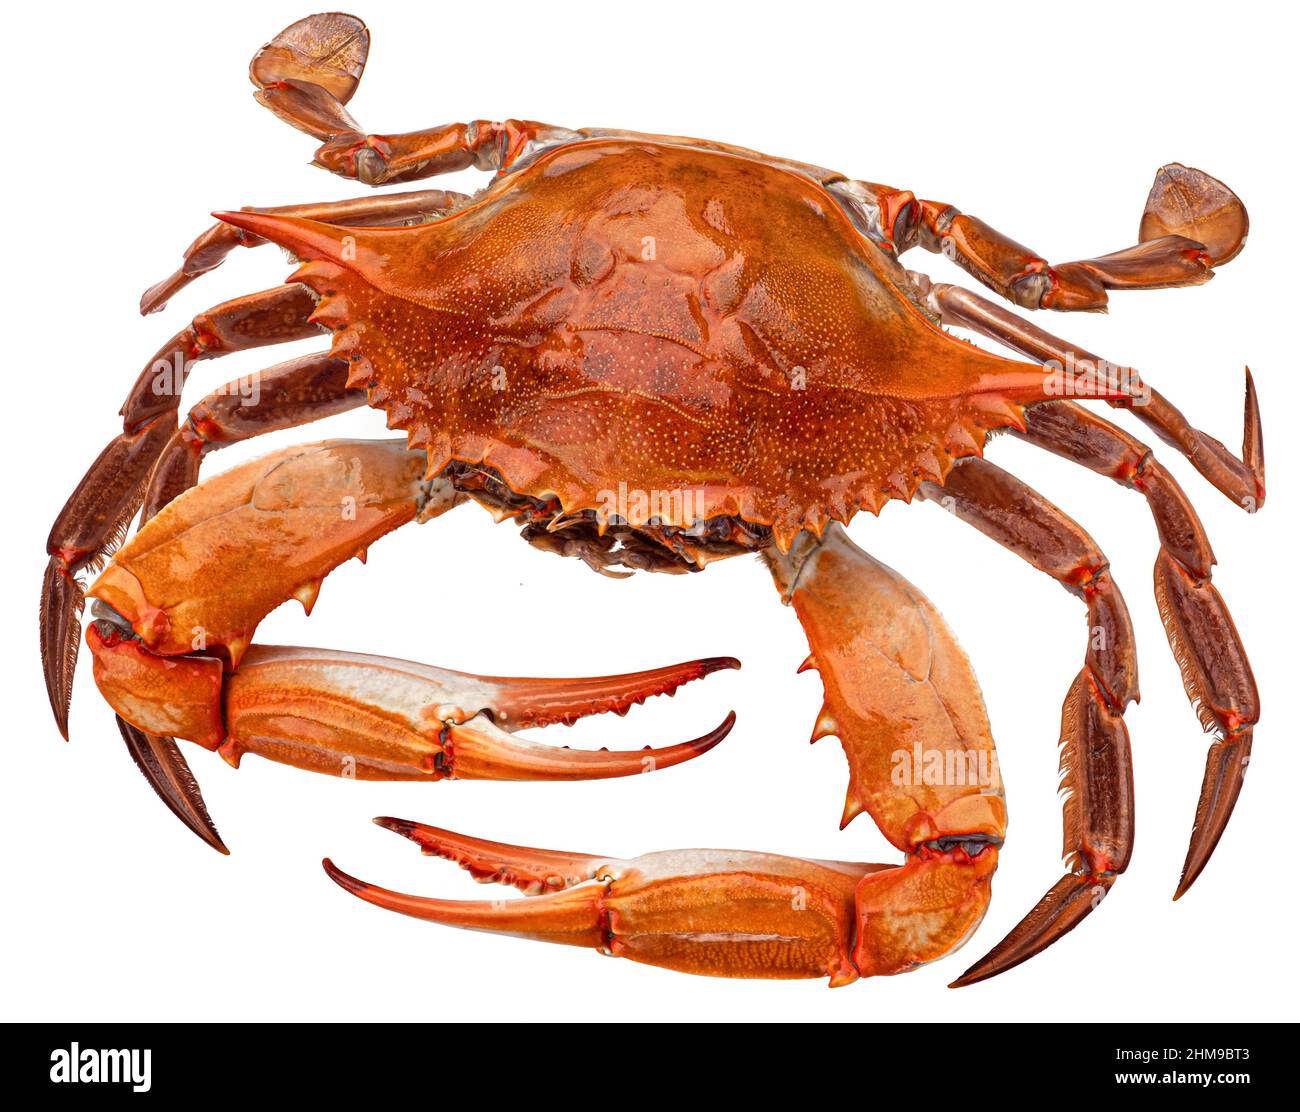 Cooked blue crab isolated on white background Stock Photo